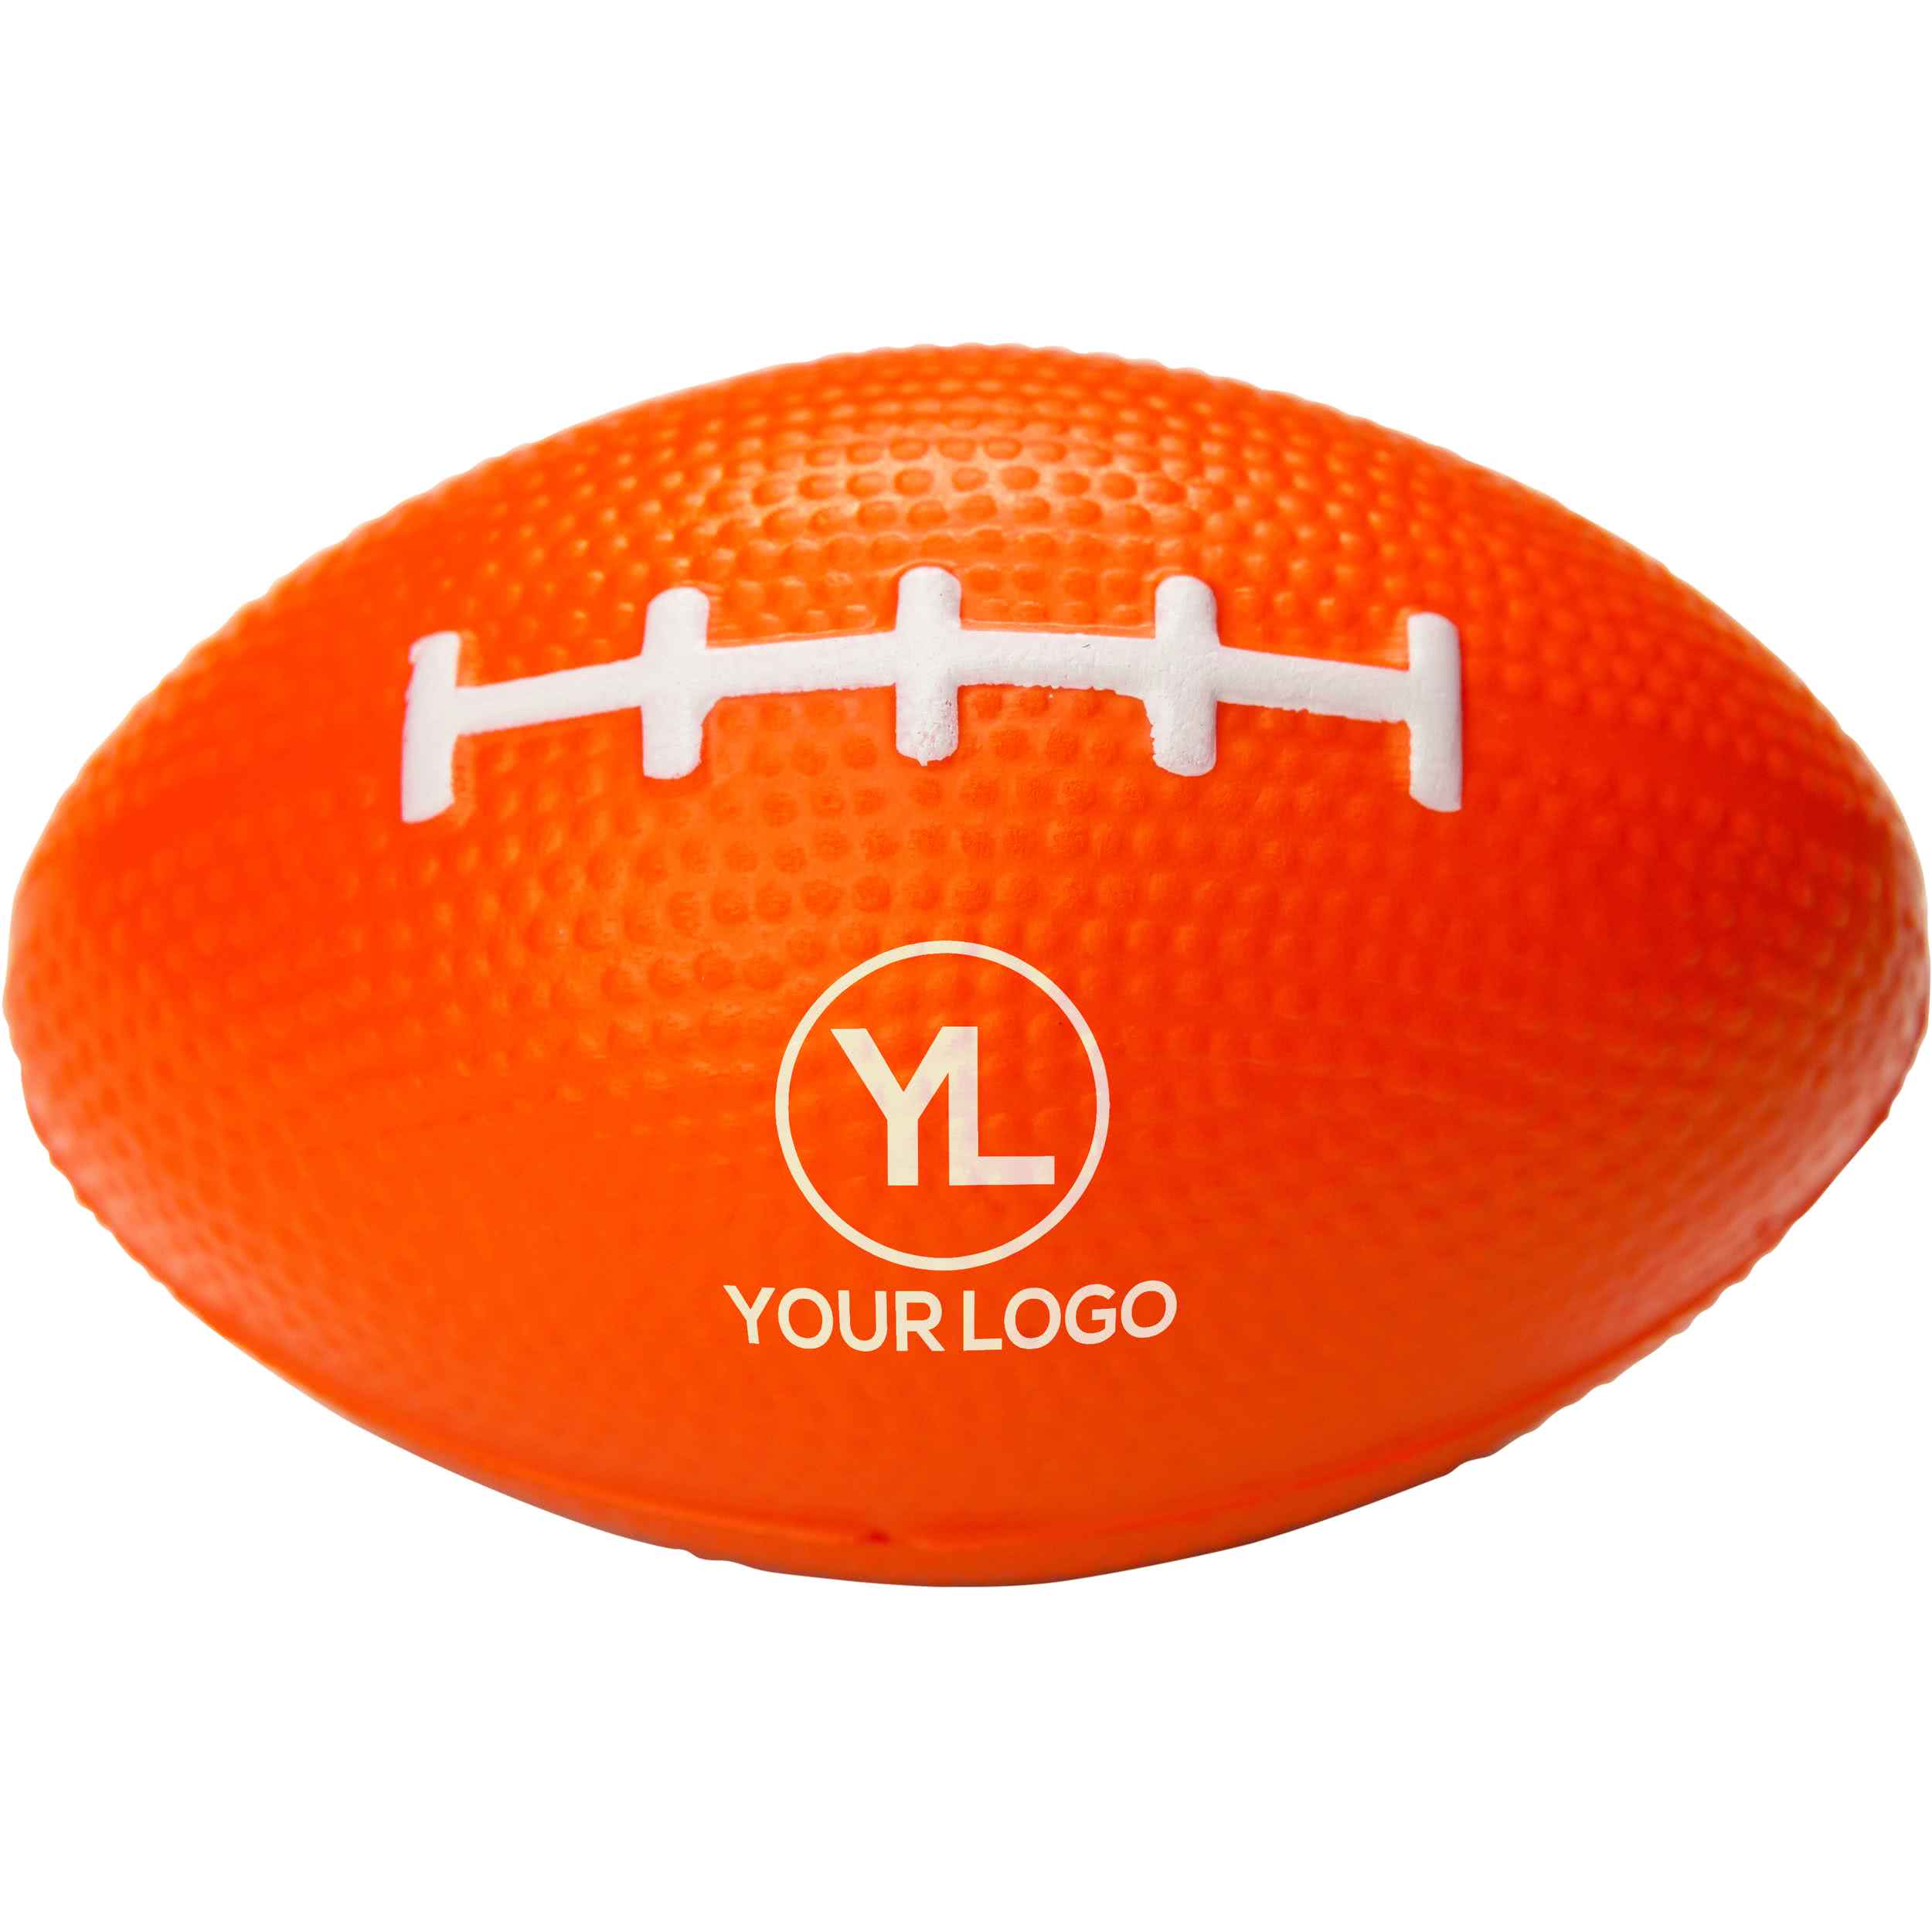 Red and Orange Ball Logo - Promotional Small Football Stress Balls with Custom Logo for $0.77 Ea.